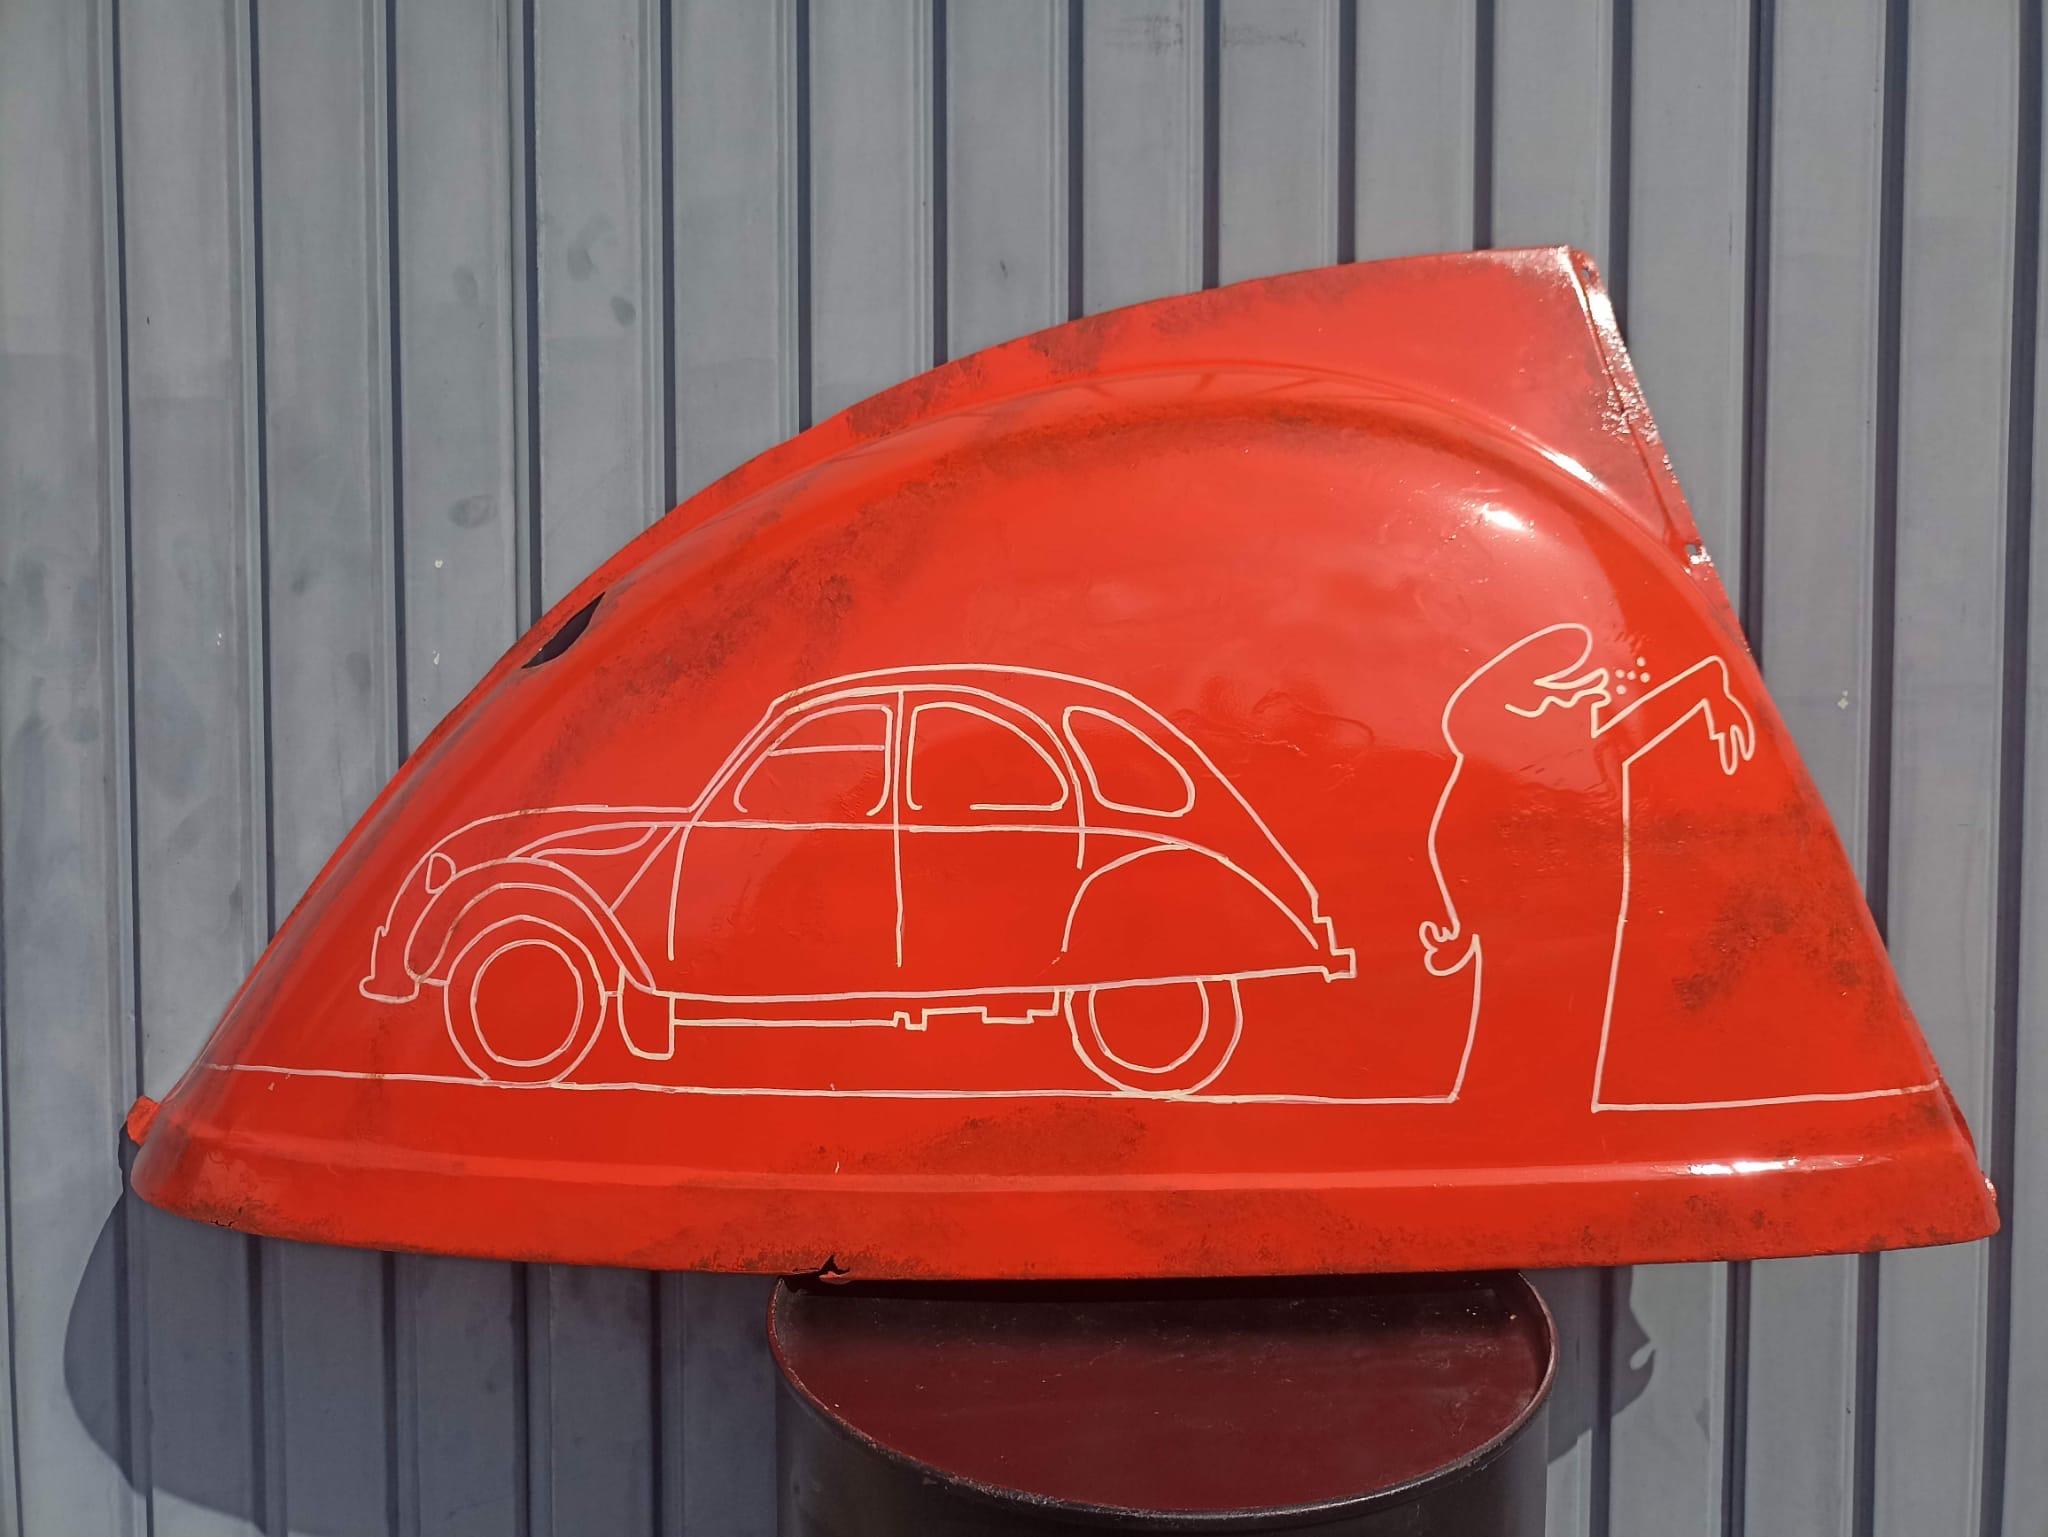 Metal Vinc Tribute to the Linea and its 2CV Acrylic on the right rear wing of a 2CV For Sale